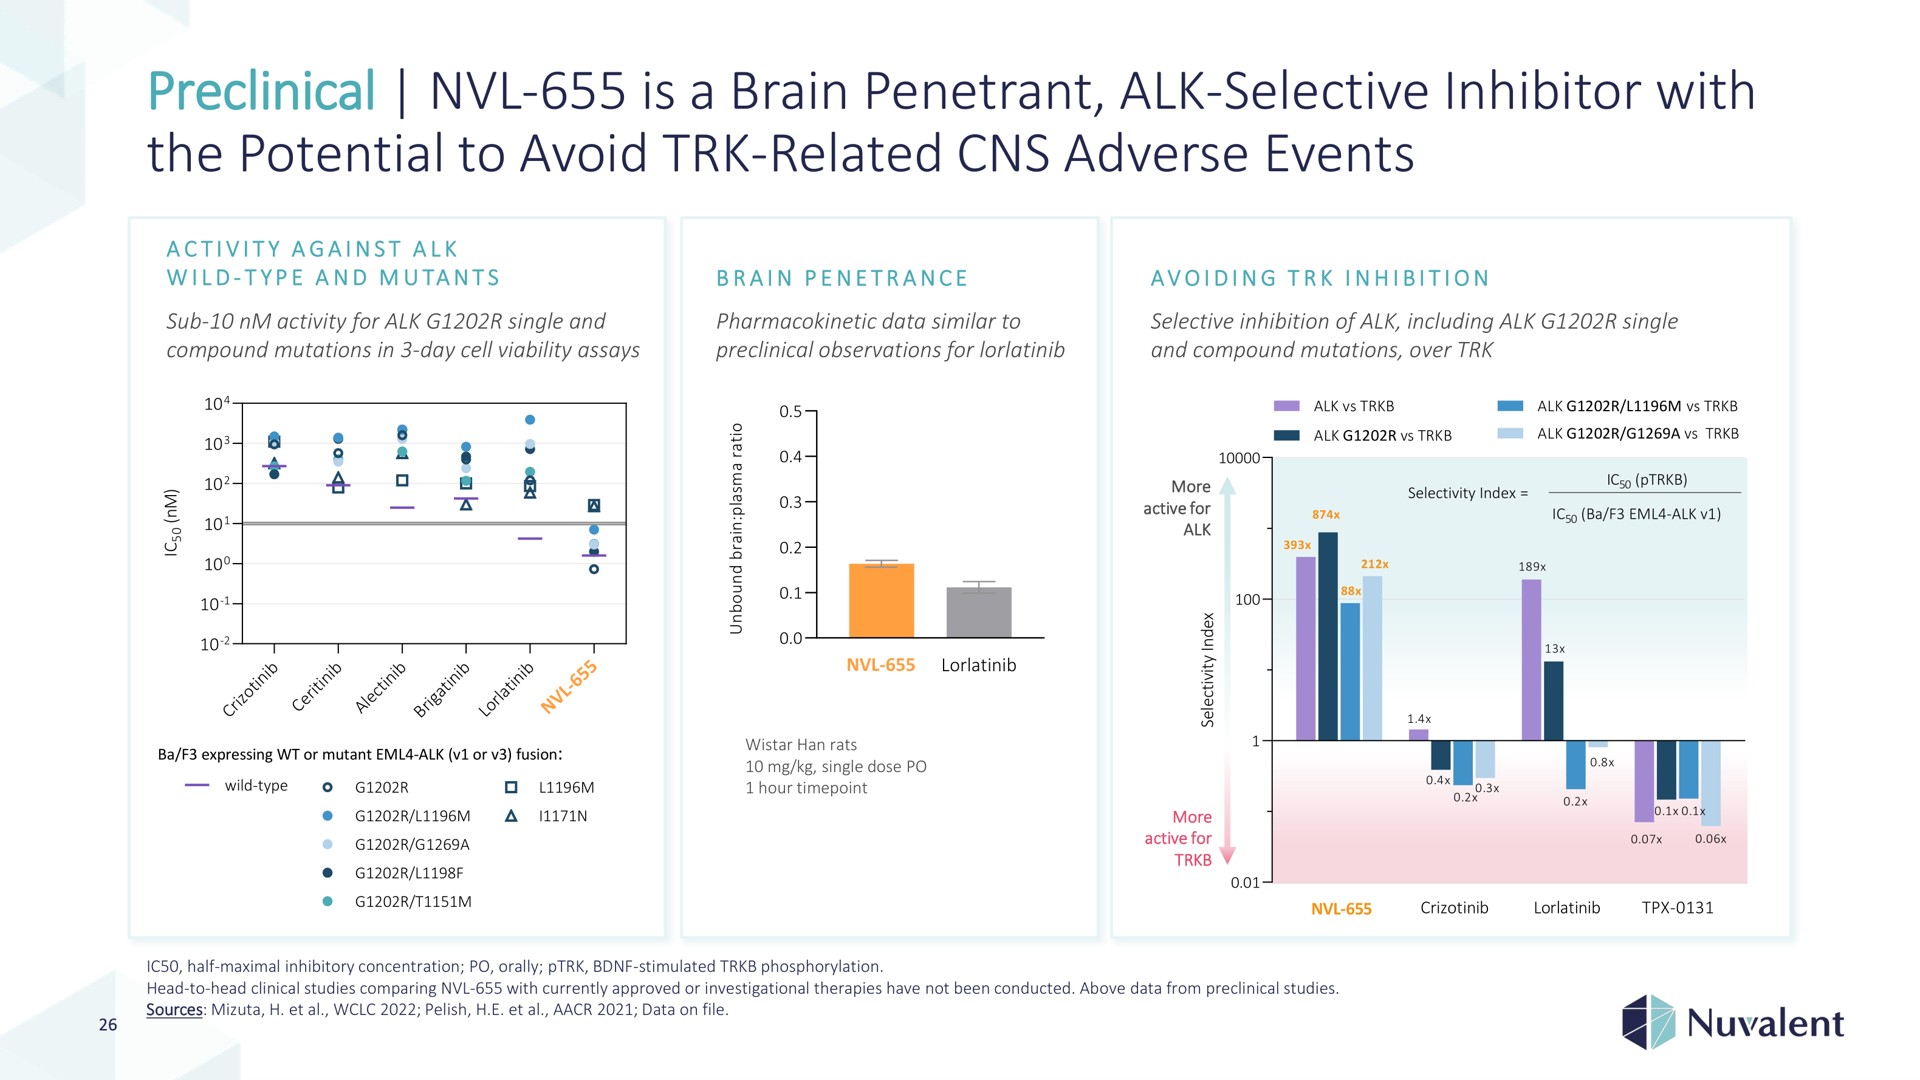 preclinical is a brain penetrant alk selective inhibitor with the potential to avoid related adverse events | Nuvalent